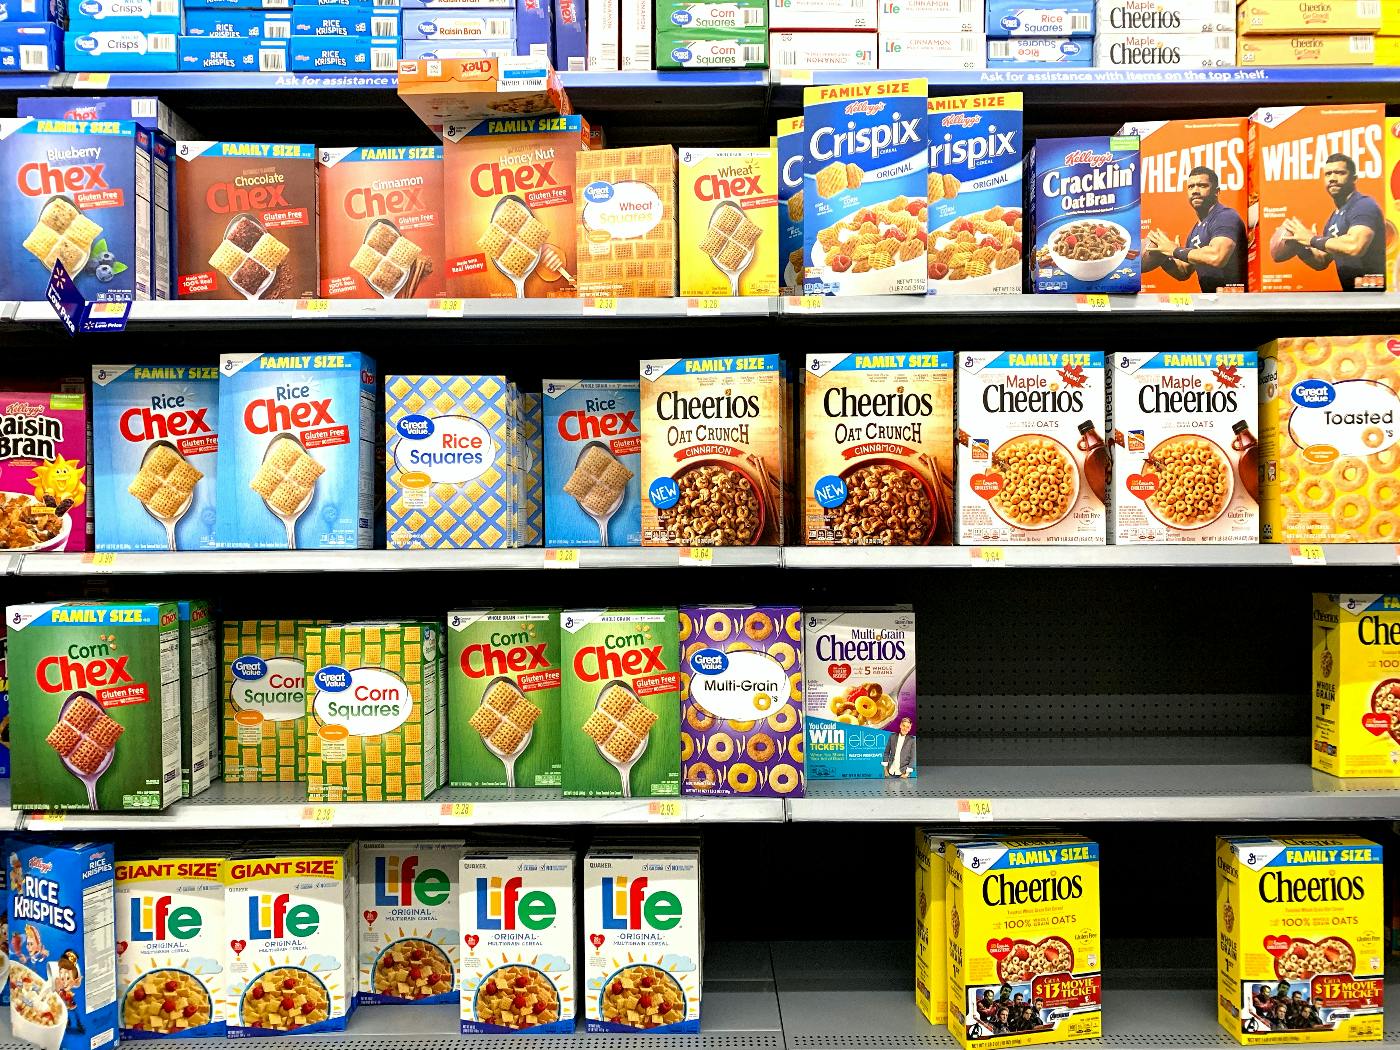 Shelves full of "healthy" cereals